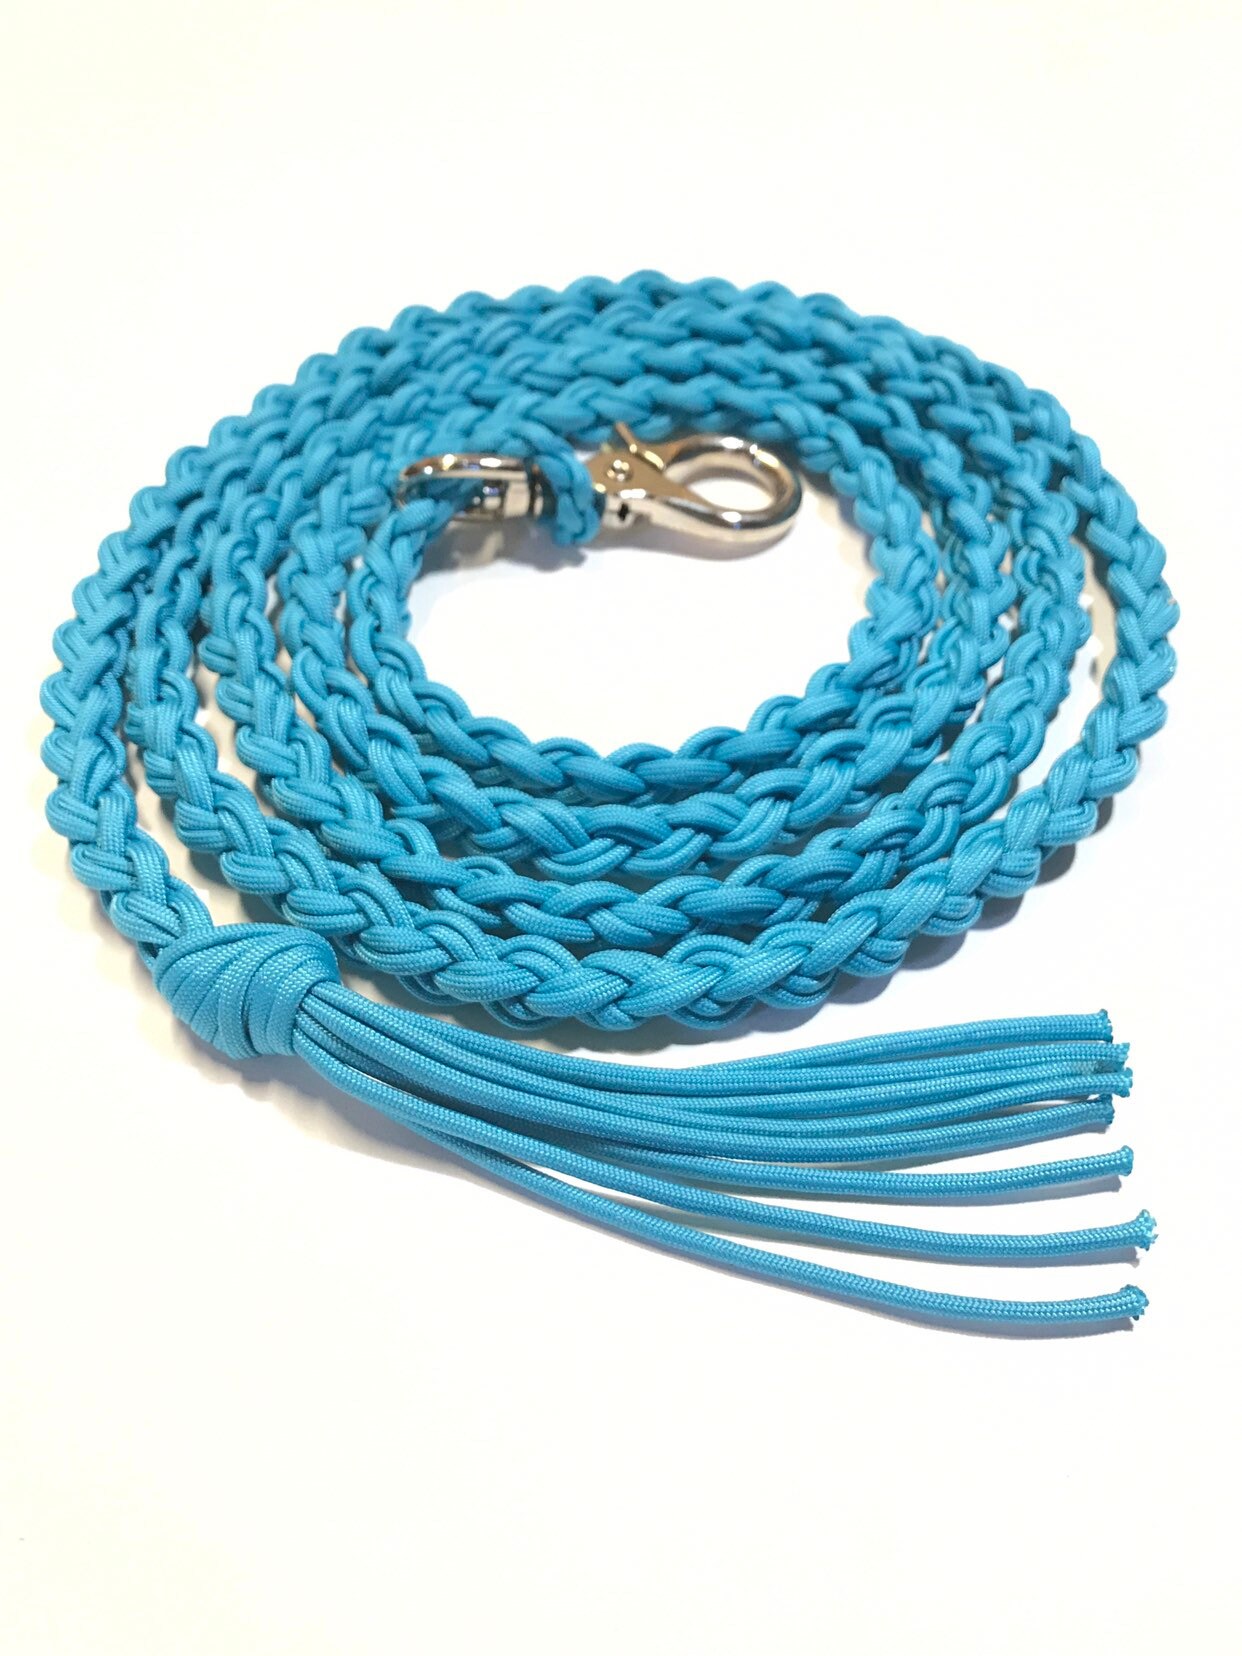 Braided Lead Rope, Paracord Lead Rope, Braided Lead Rope, 8